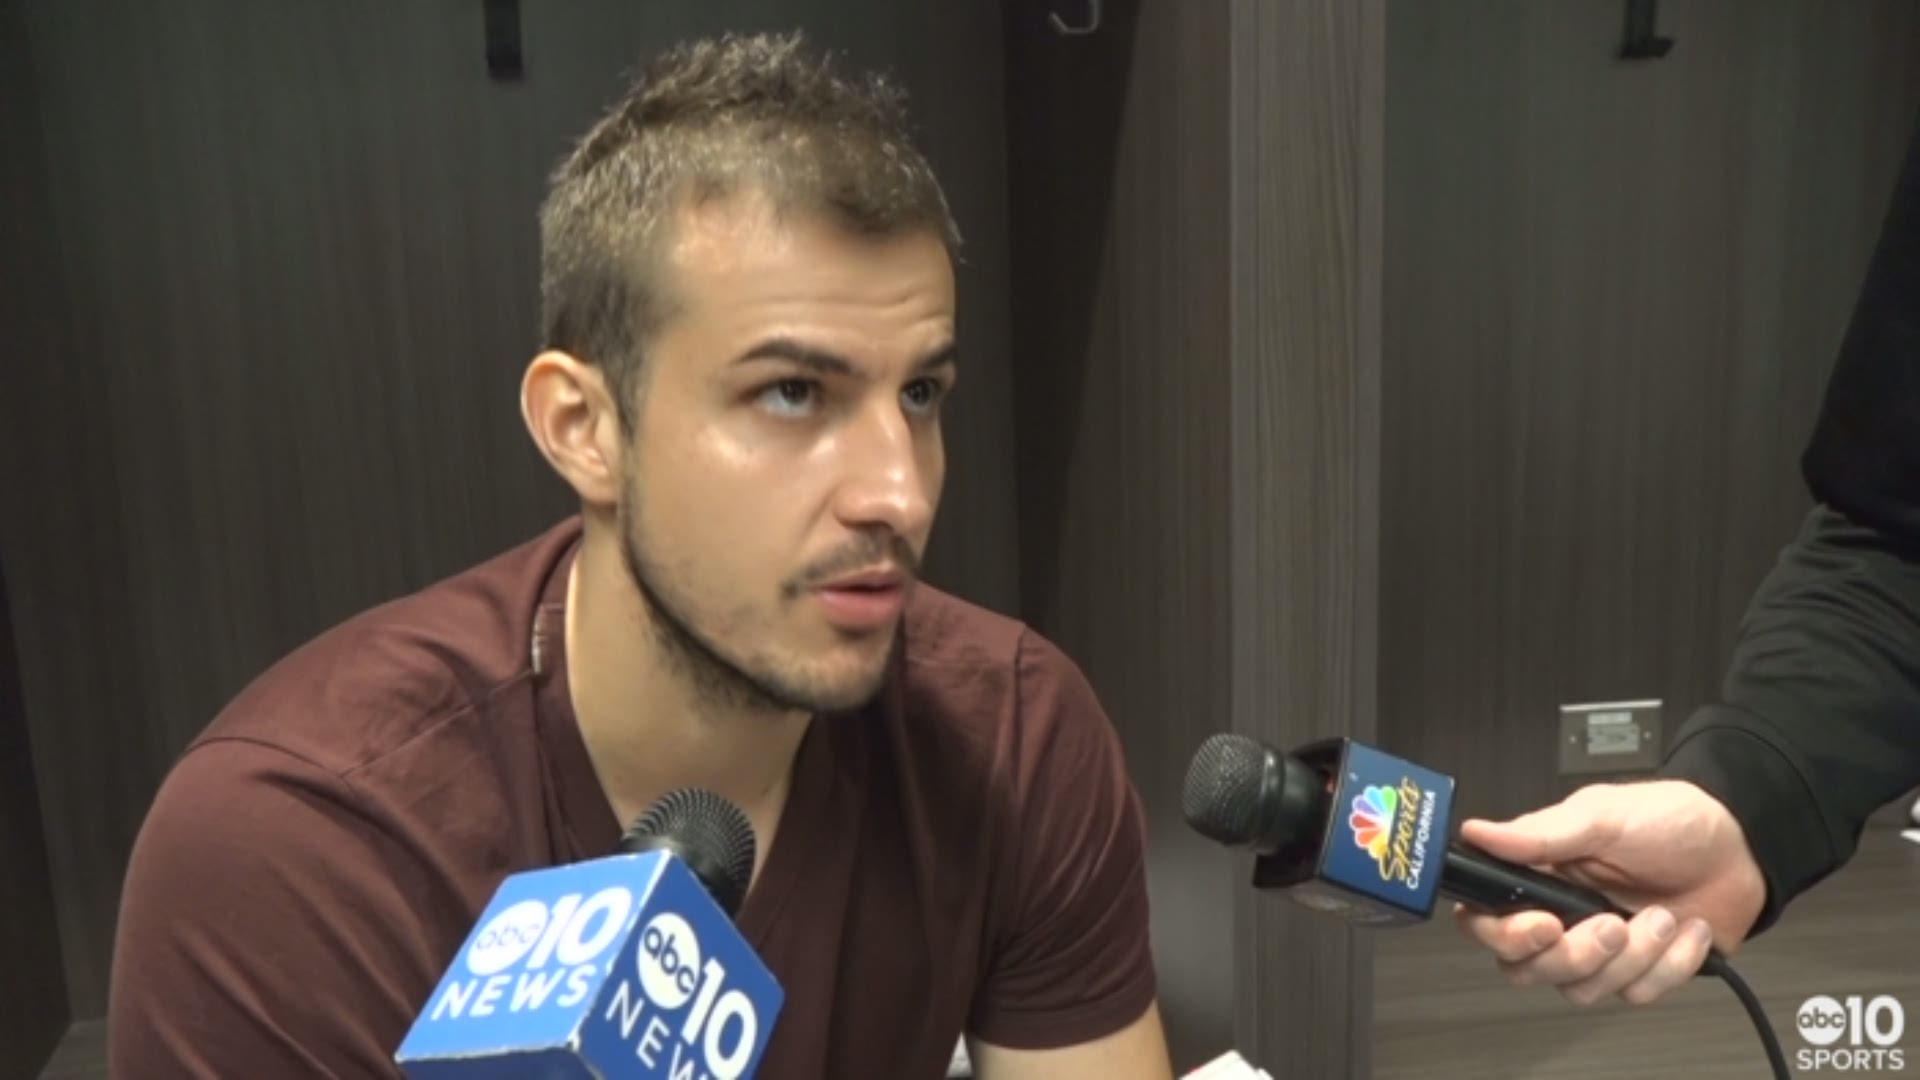 Sacramento Kings forward Nemanja Bjelica talks about rejoining the team after injury and what he saw from the team in games while he was sidelined.